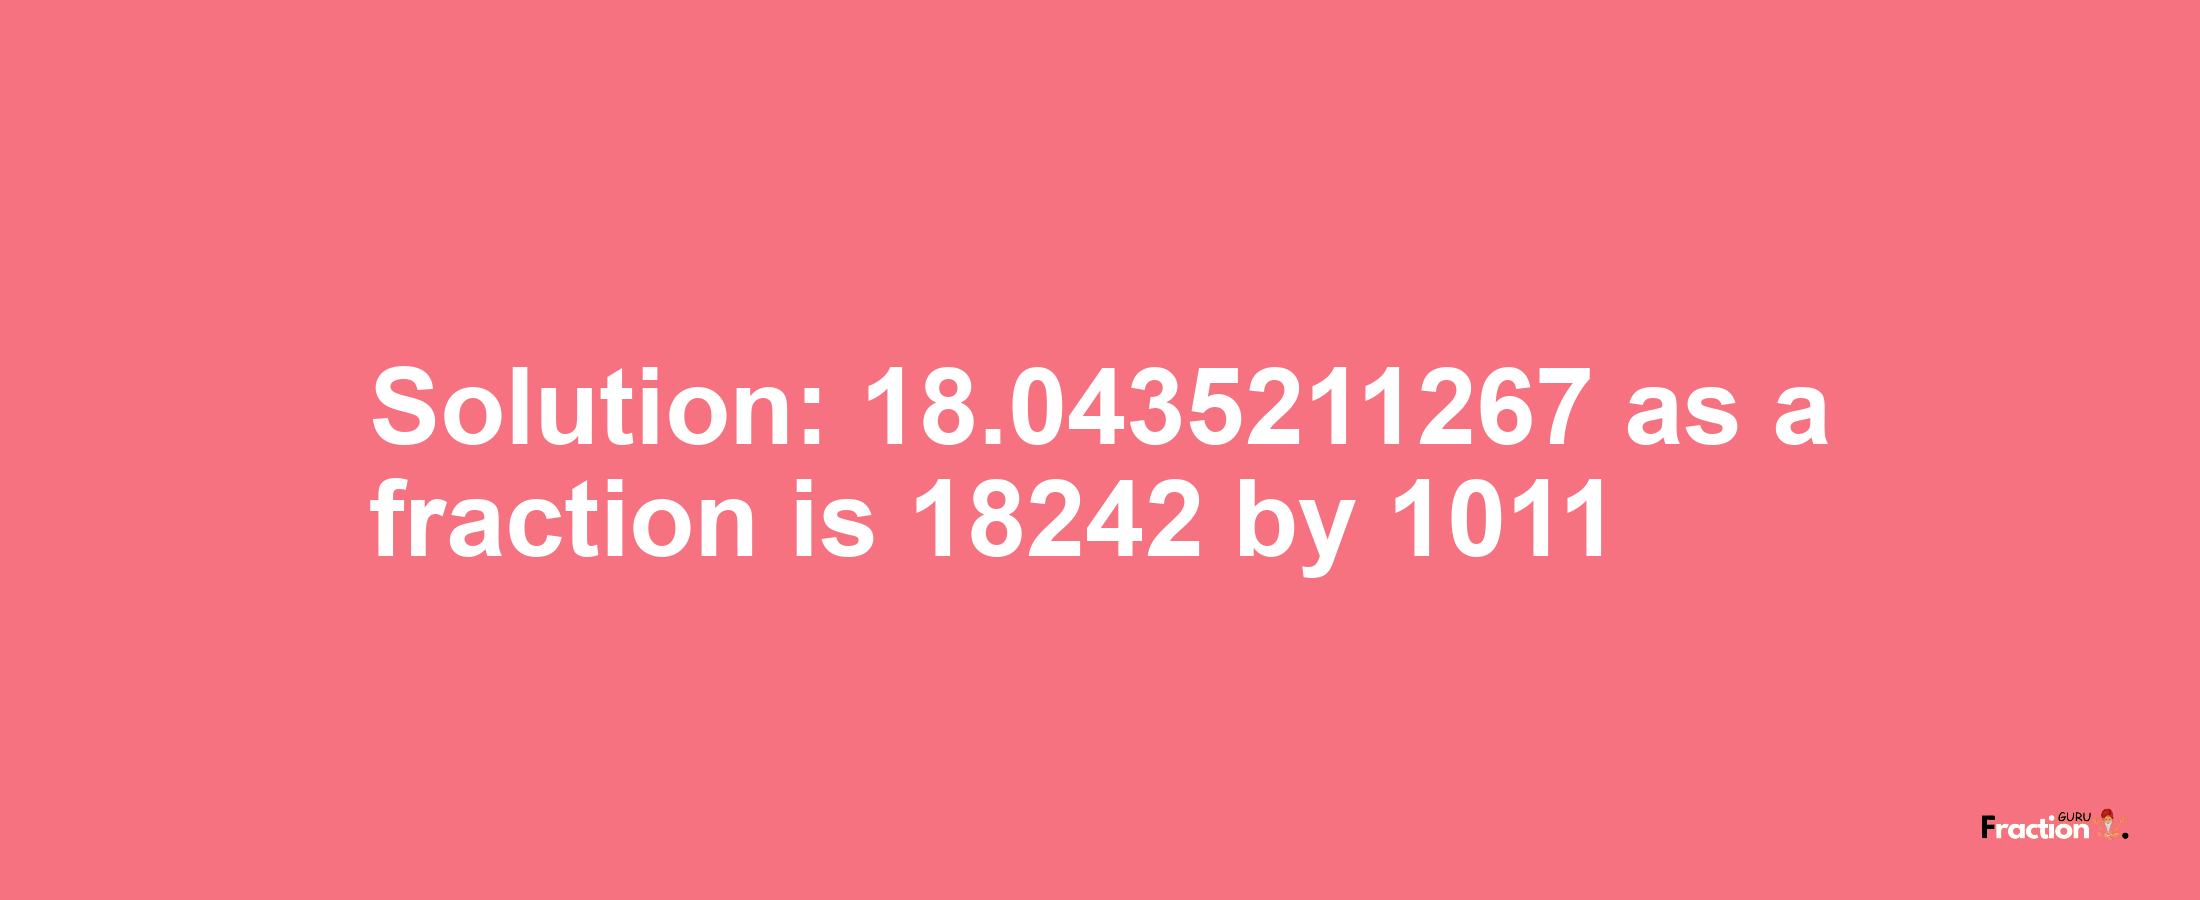 Solution:18.0435211267 as a fraction is 18242/1011